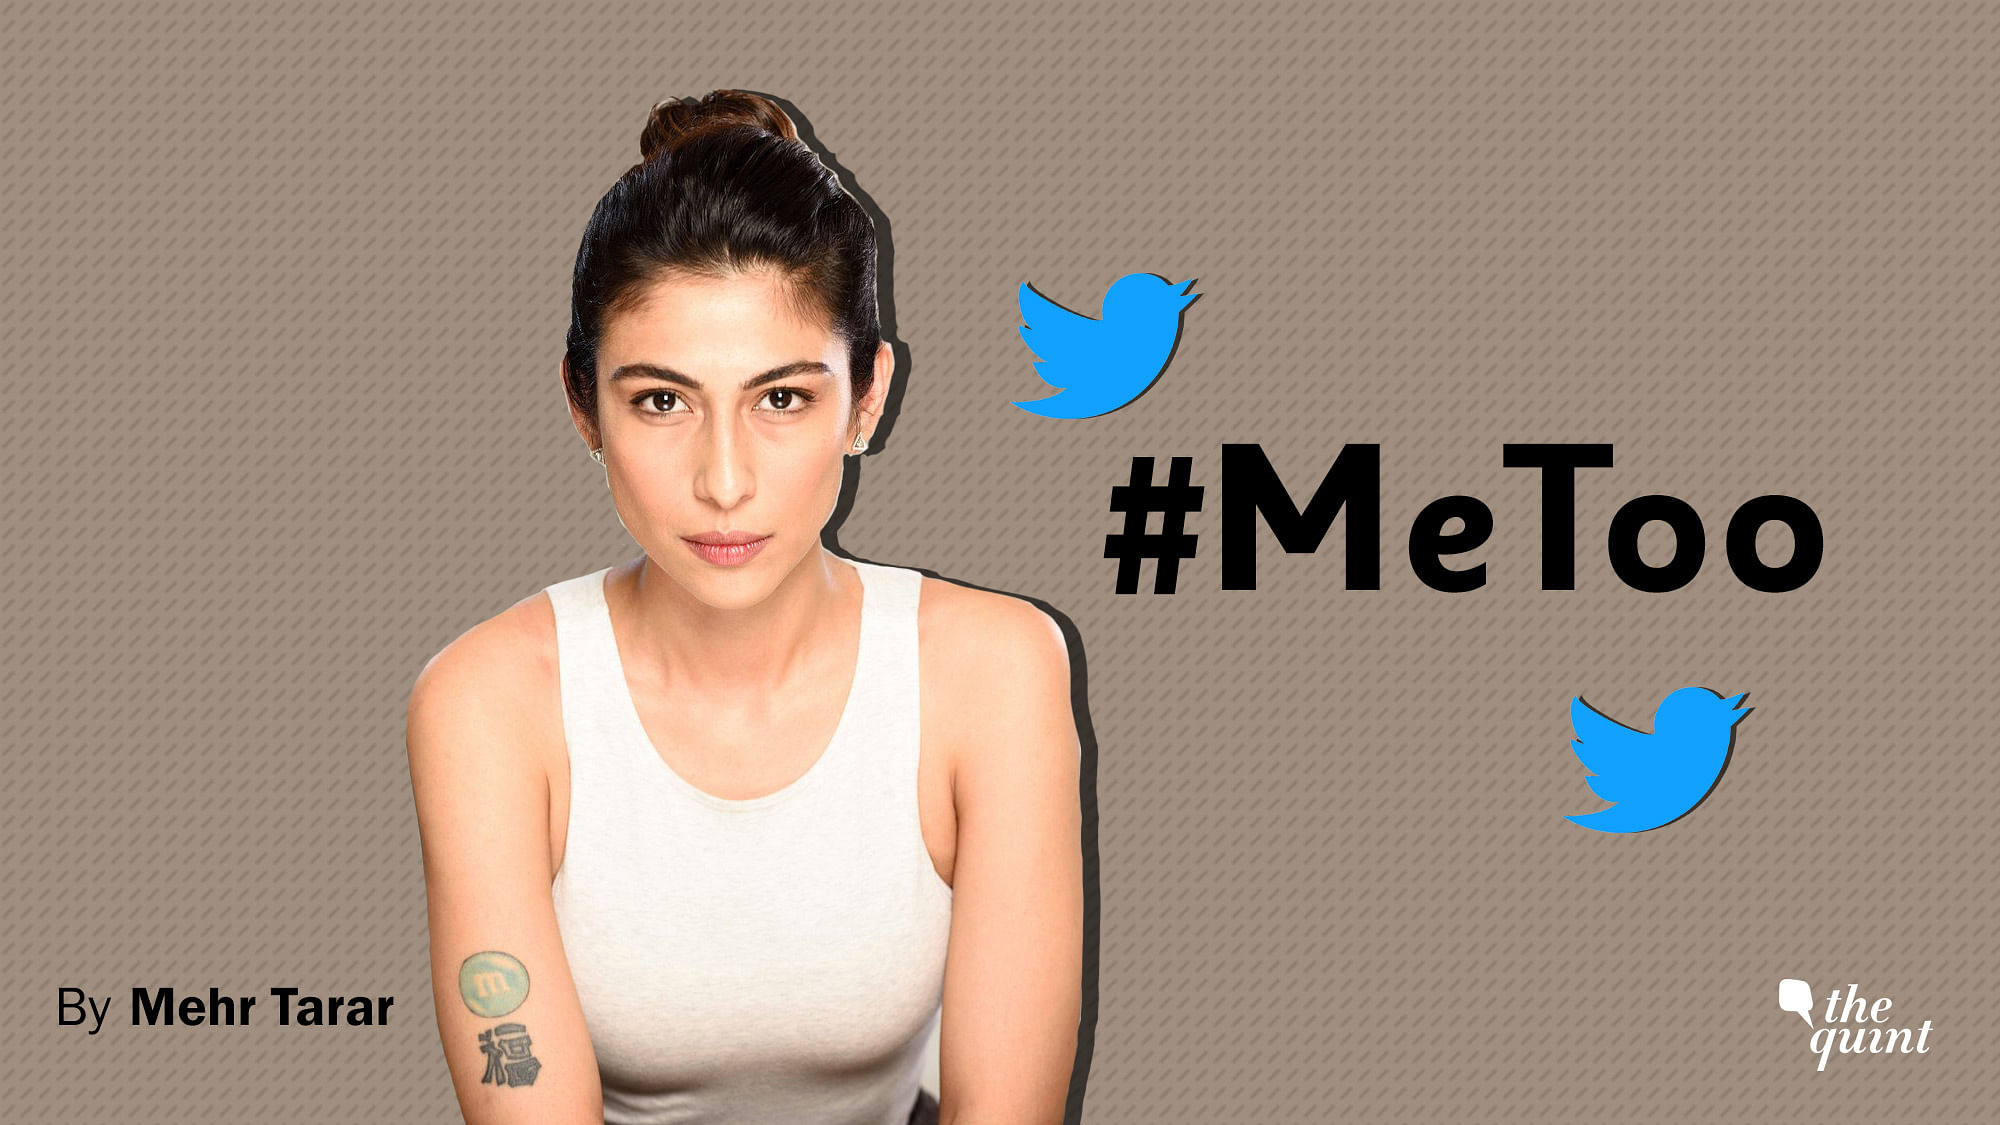 Meesha Shafi recently accused Ali Zafar of molestation, sparking huge online outcry.